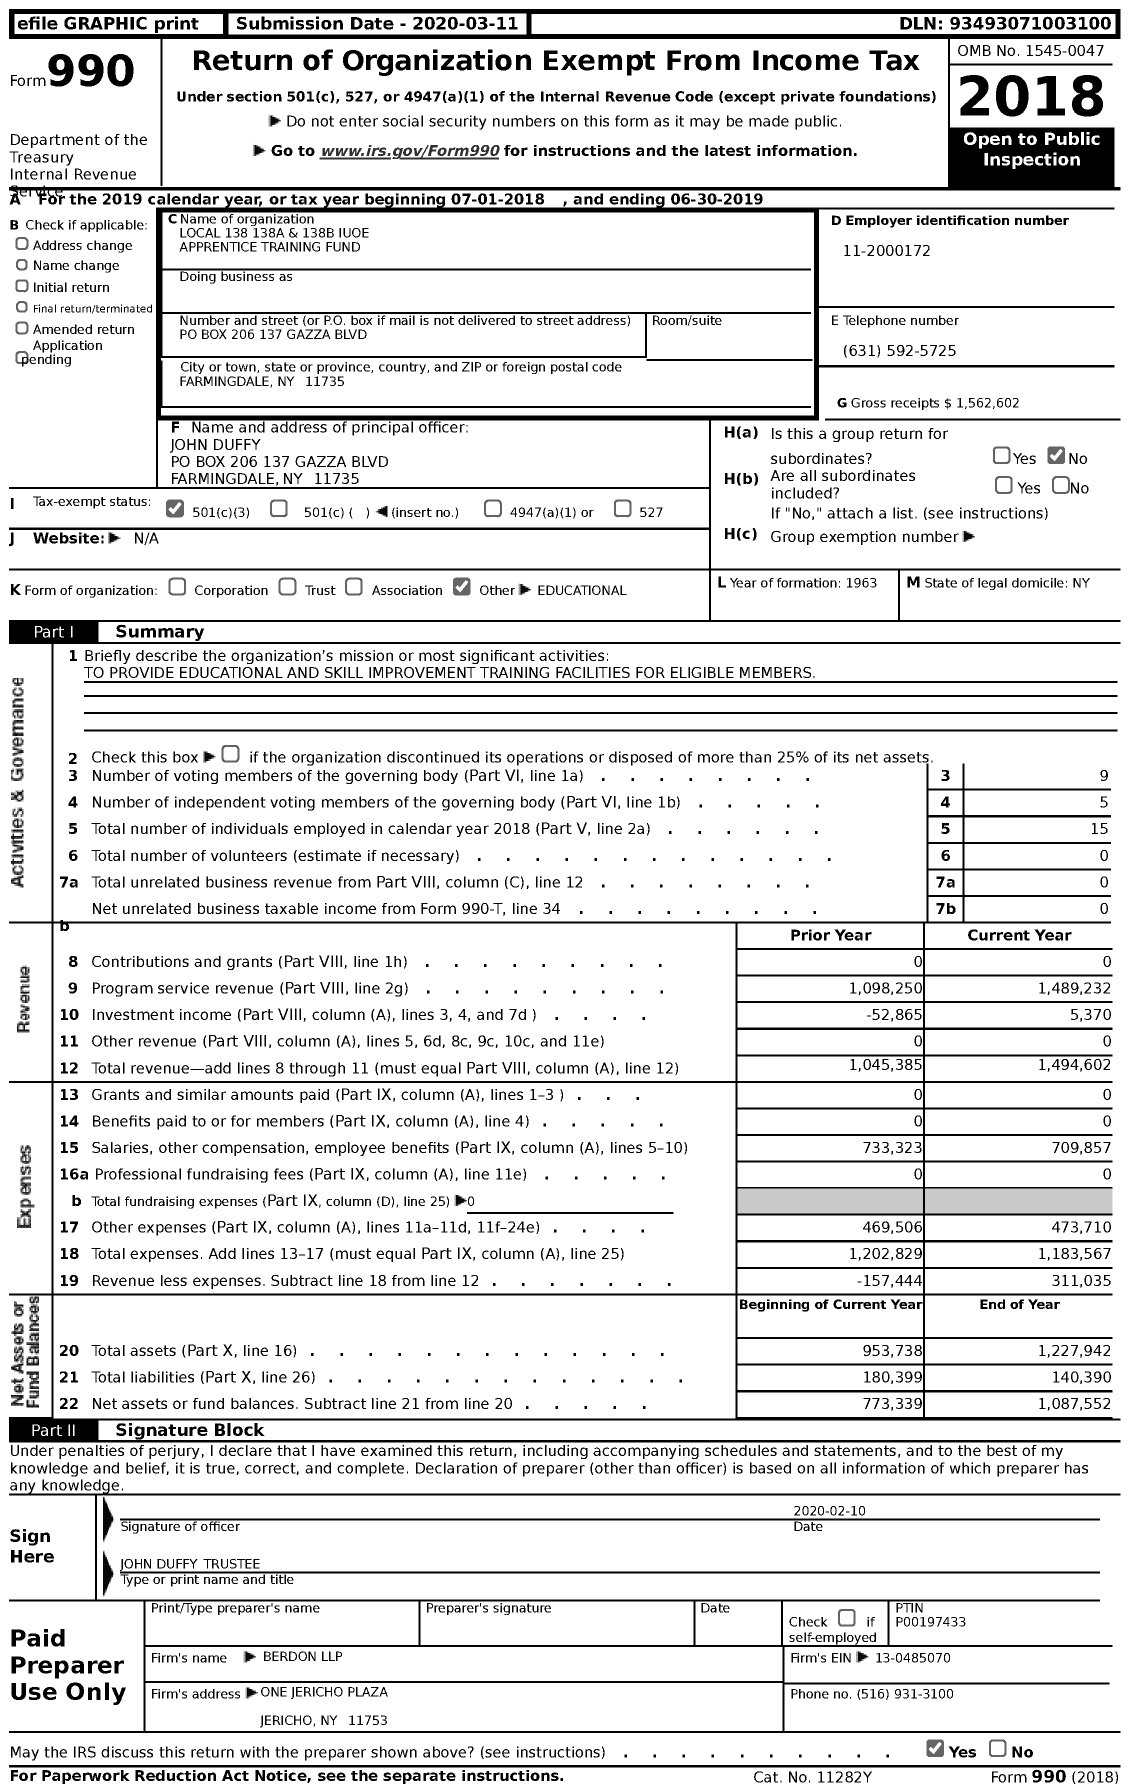 Image of first page of 2018 Form 990 for Local 138 138a and 138b Iuoe Apprentice Training Fund